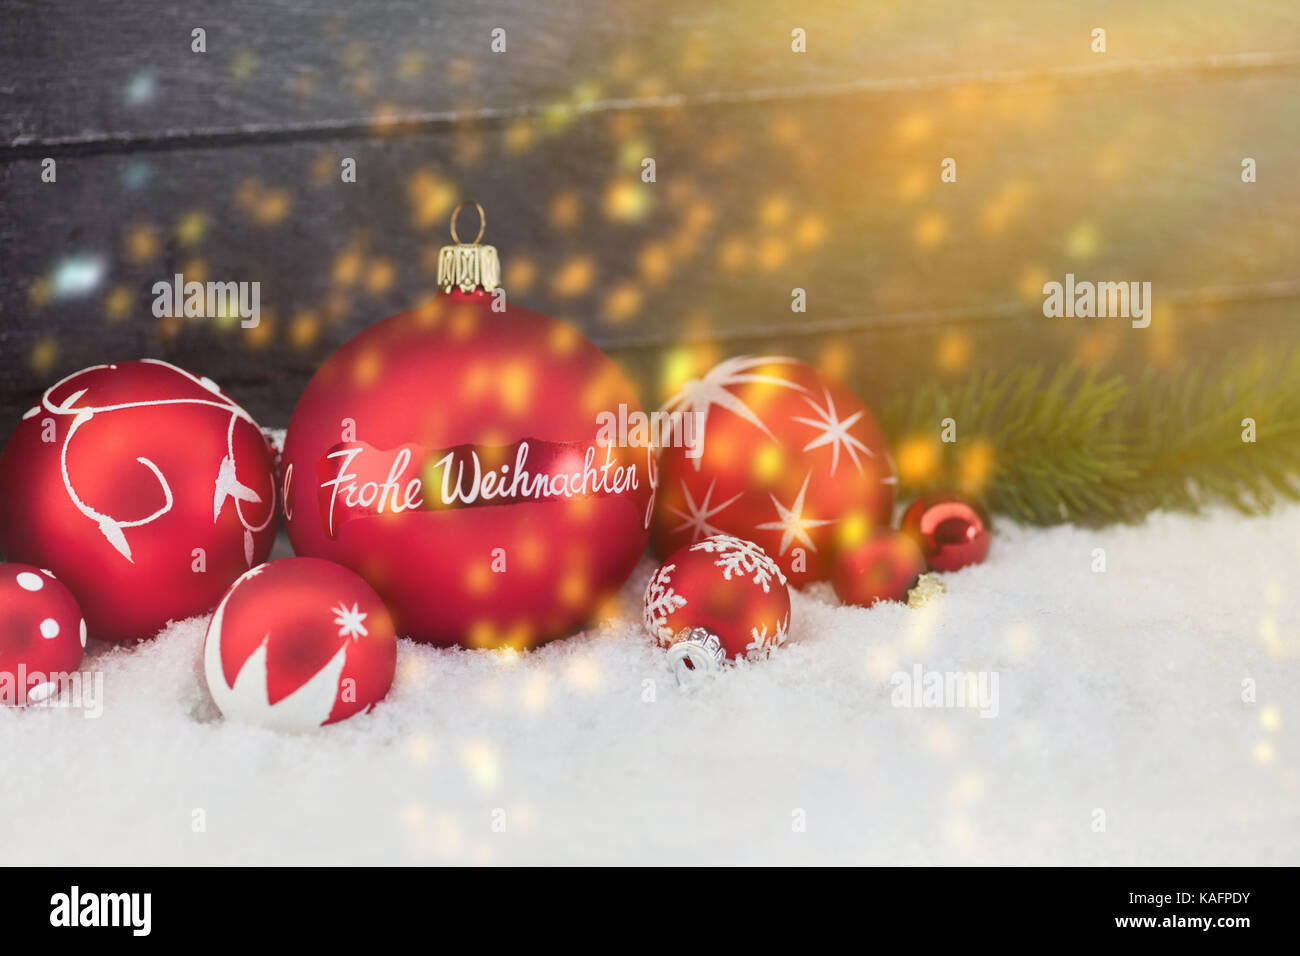 Frohe Weihnachten (Merry Christmas) background as card for the holiday Stock Photo